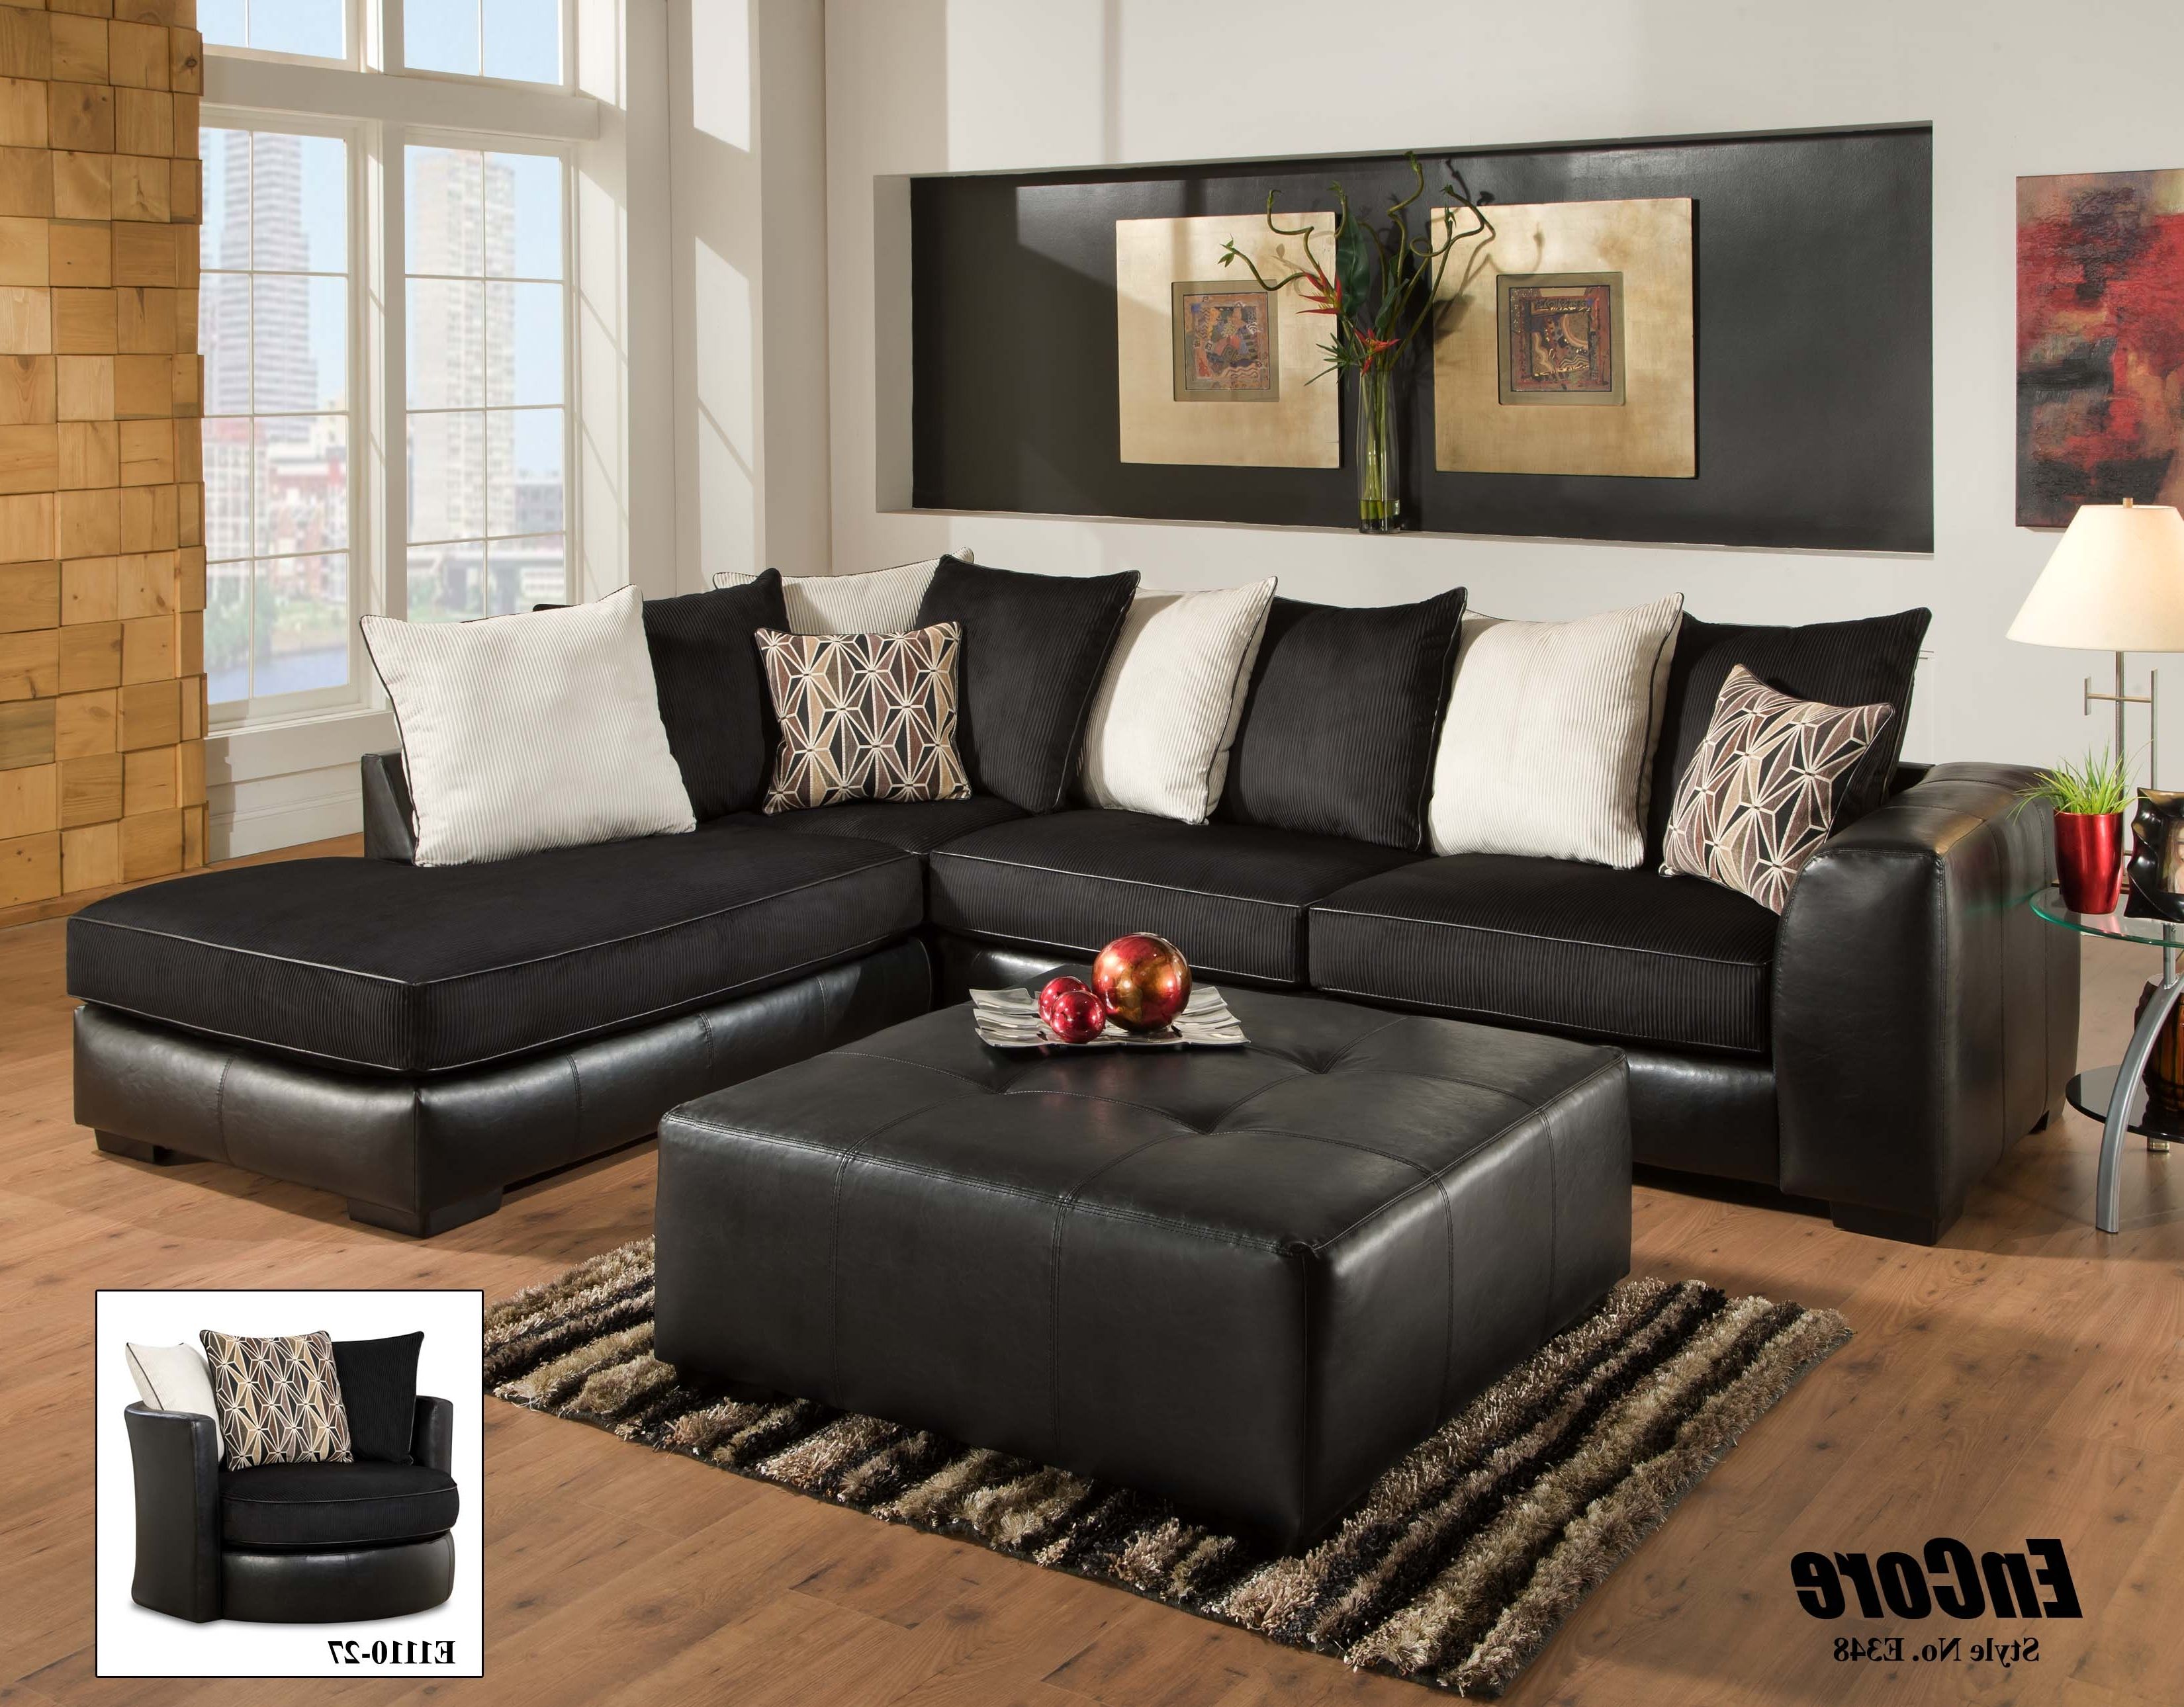 Best And Newest Pittsburgh Sectional Sofas Intended For Great American Freight Sofas On Decorating American Freight (View 7 of 15)